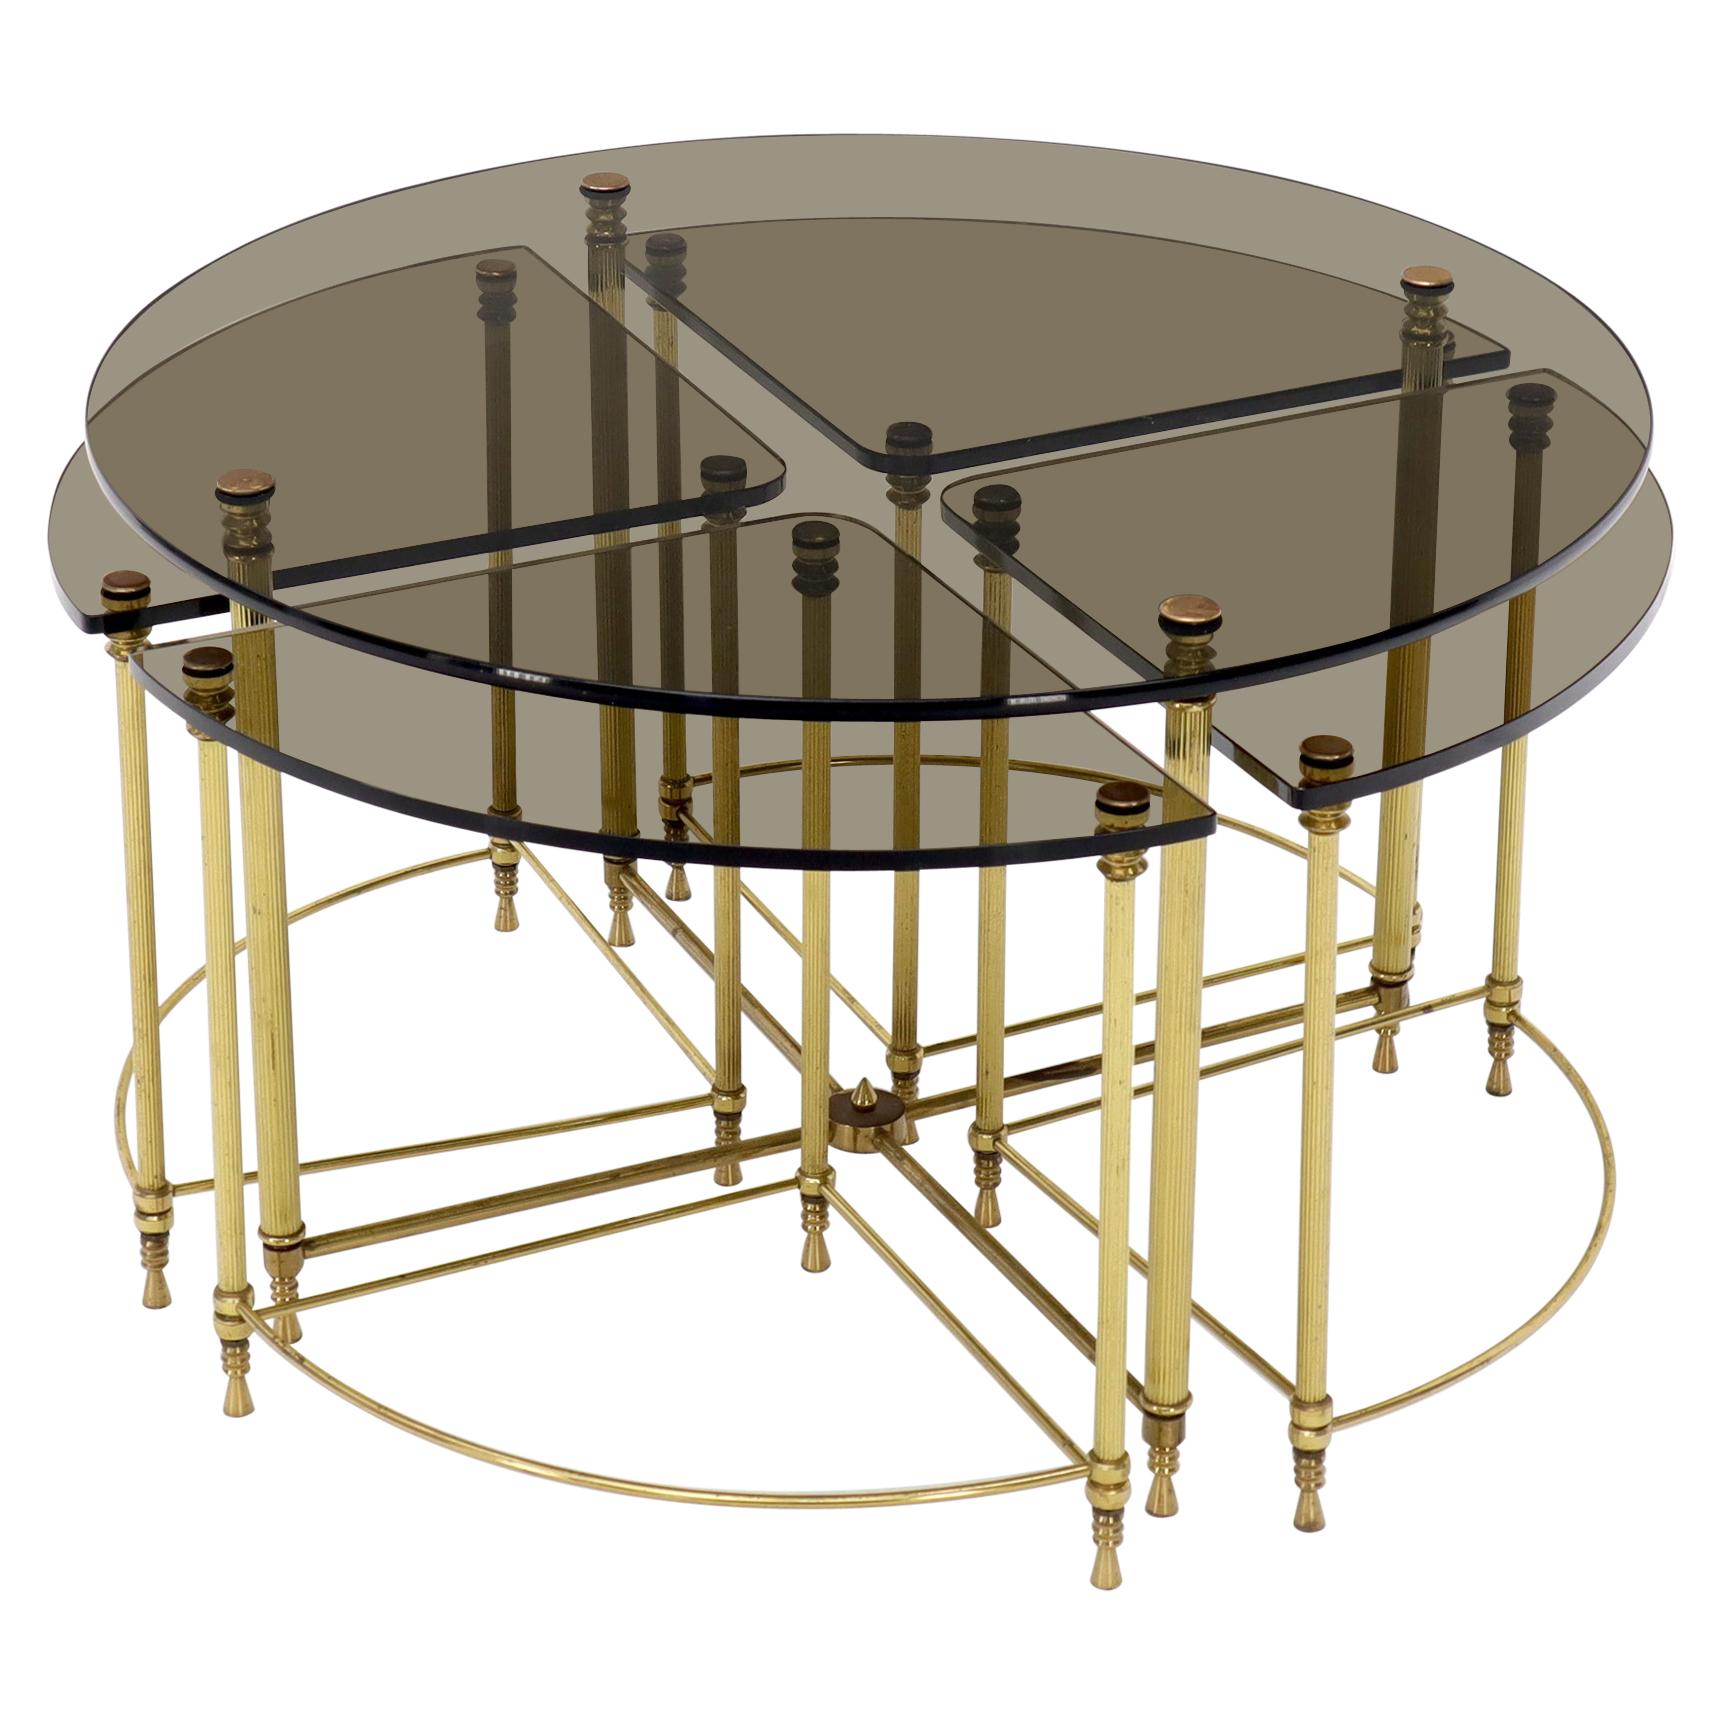 Circular Round Smoked Glass Brass Legs Nesting Coffee Table For Sale